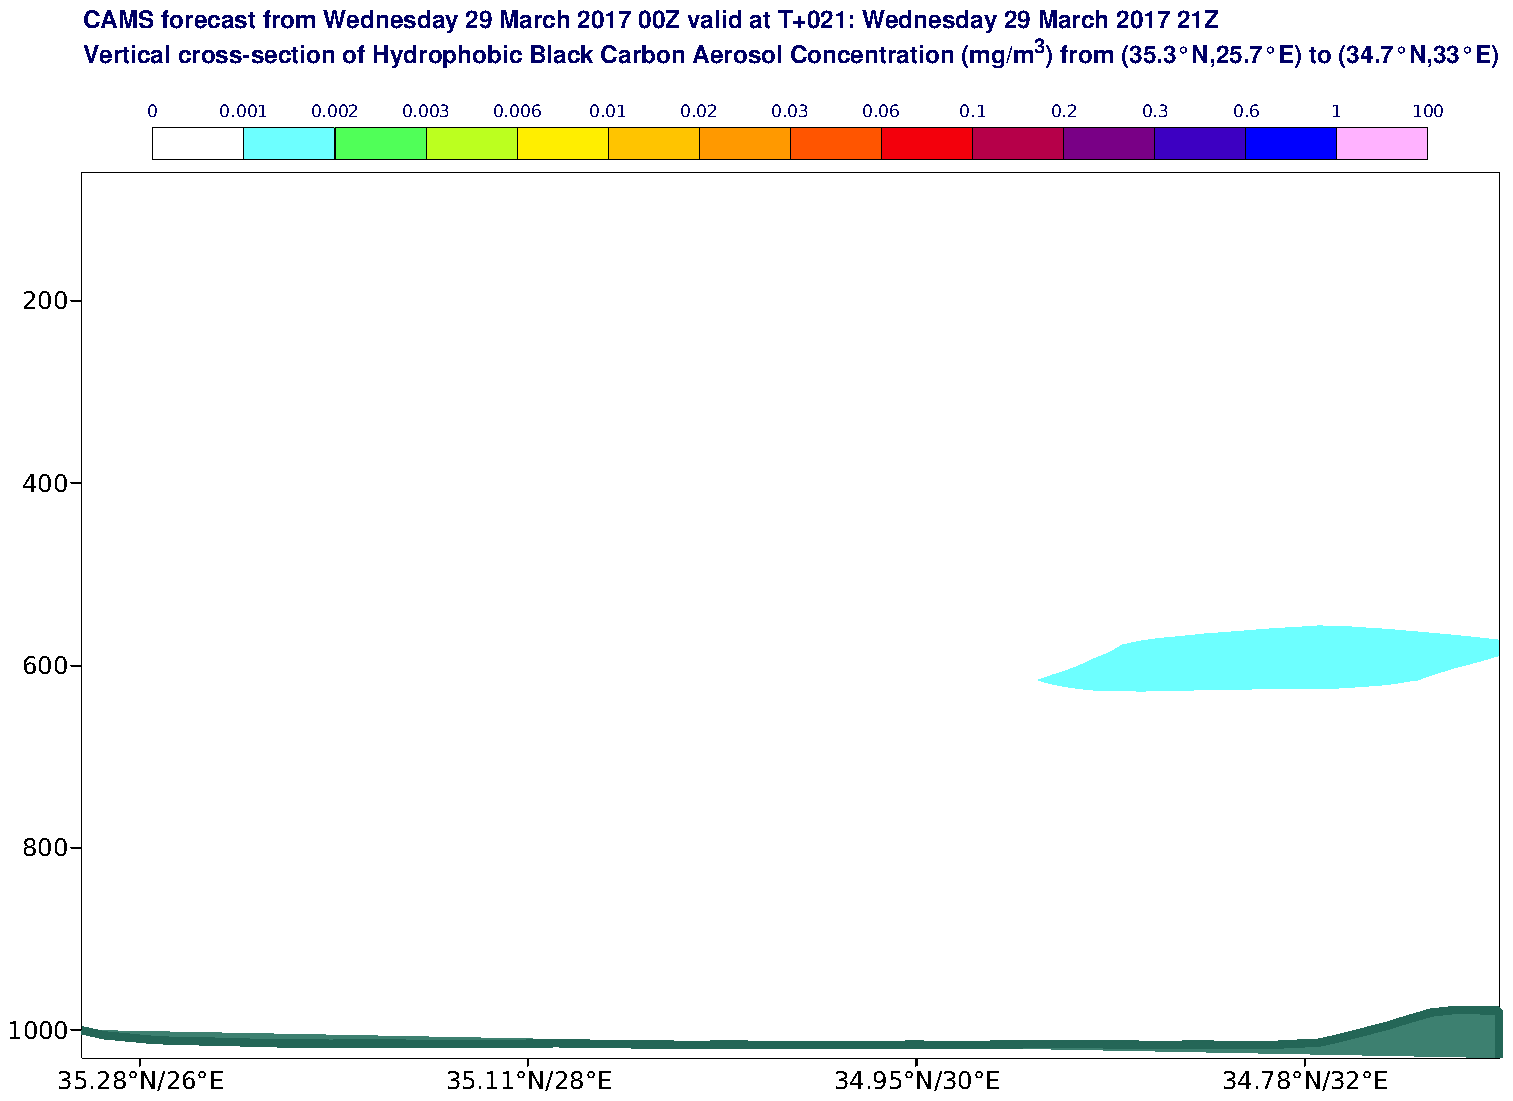 Vertical cross-section of Hydrophobic Black Carbon Aerosol Concentration (mg/m3) valid at T21 - 2017-03-29 21:00